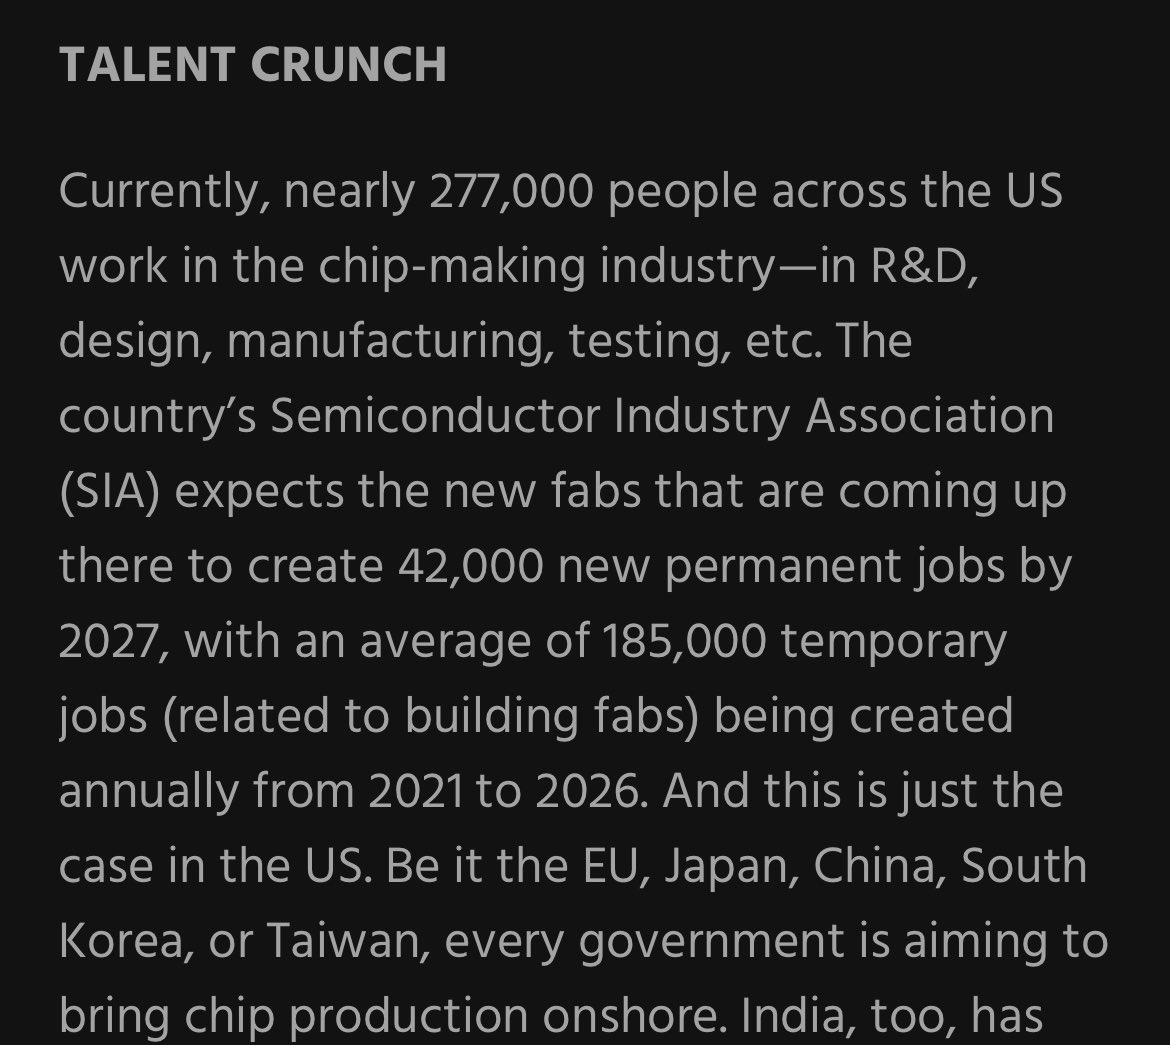 Next wave of H1B employment may come for ECE Engineers in place of CSE. If CSE, do a CDAC 1 yr course in ICs/VLSI (know tier 3 BEs who landed huge paying jobs via the route)

Be tactical Anon